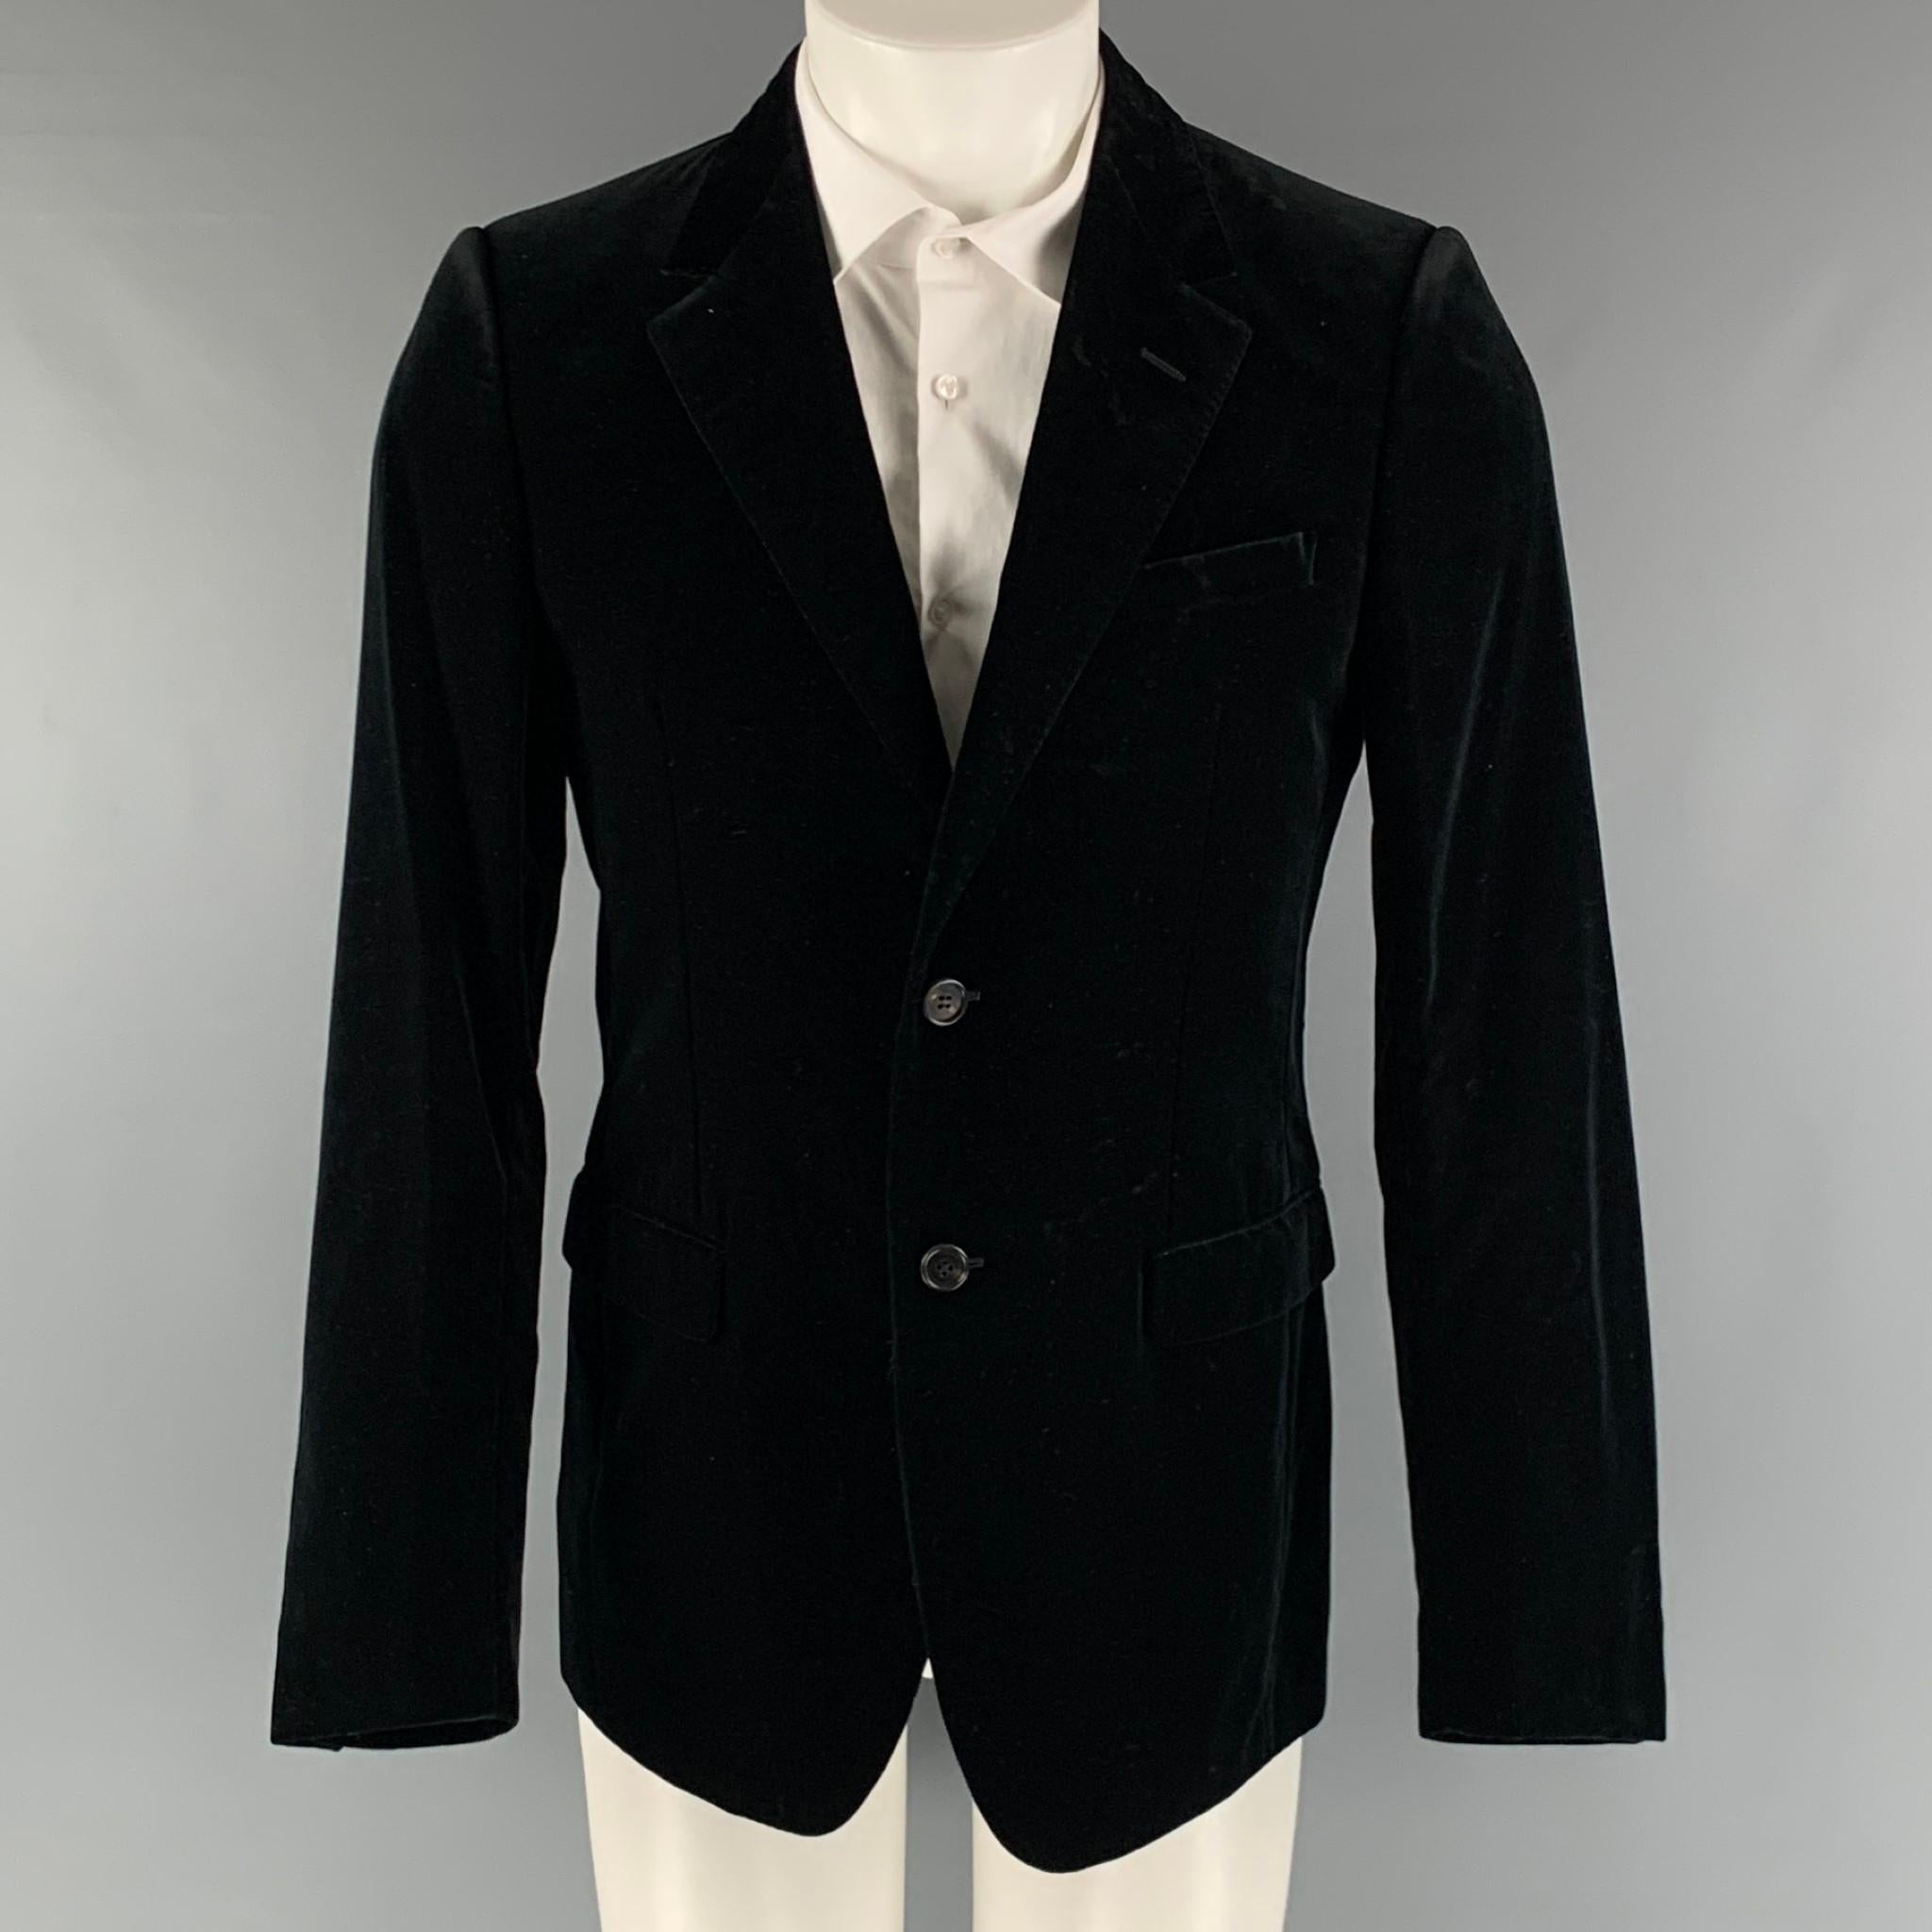 LANVIN sport coat comes in a black velvet cotton woven material with a full liner featuring a notch lapel, flap pockets, single back vent, and two button closure. Made in Italy.

Very Good Pre-Owned Condition. Minor Signs of wear.
Marked: